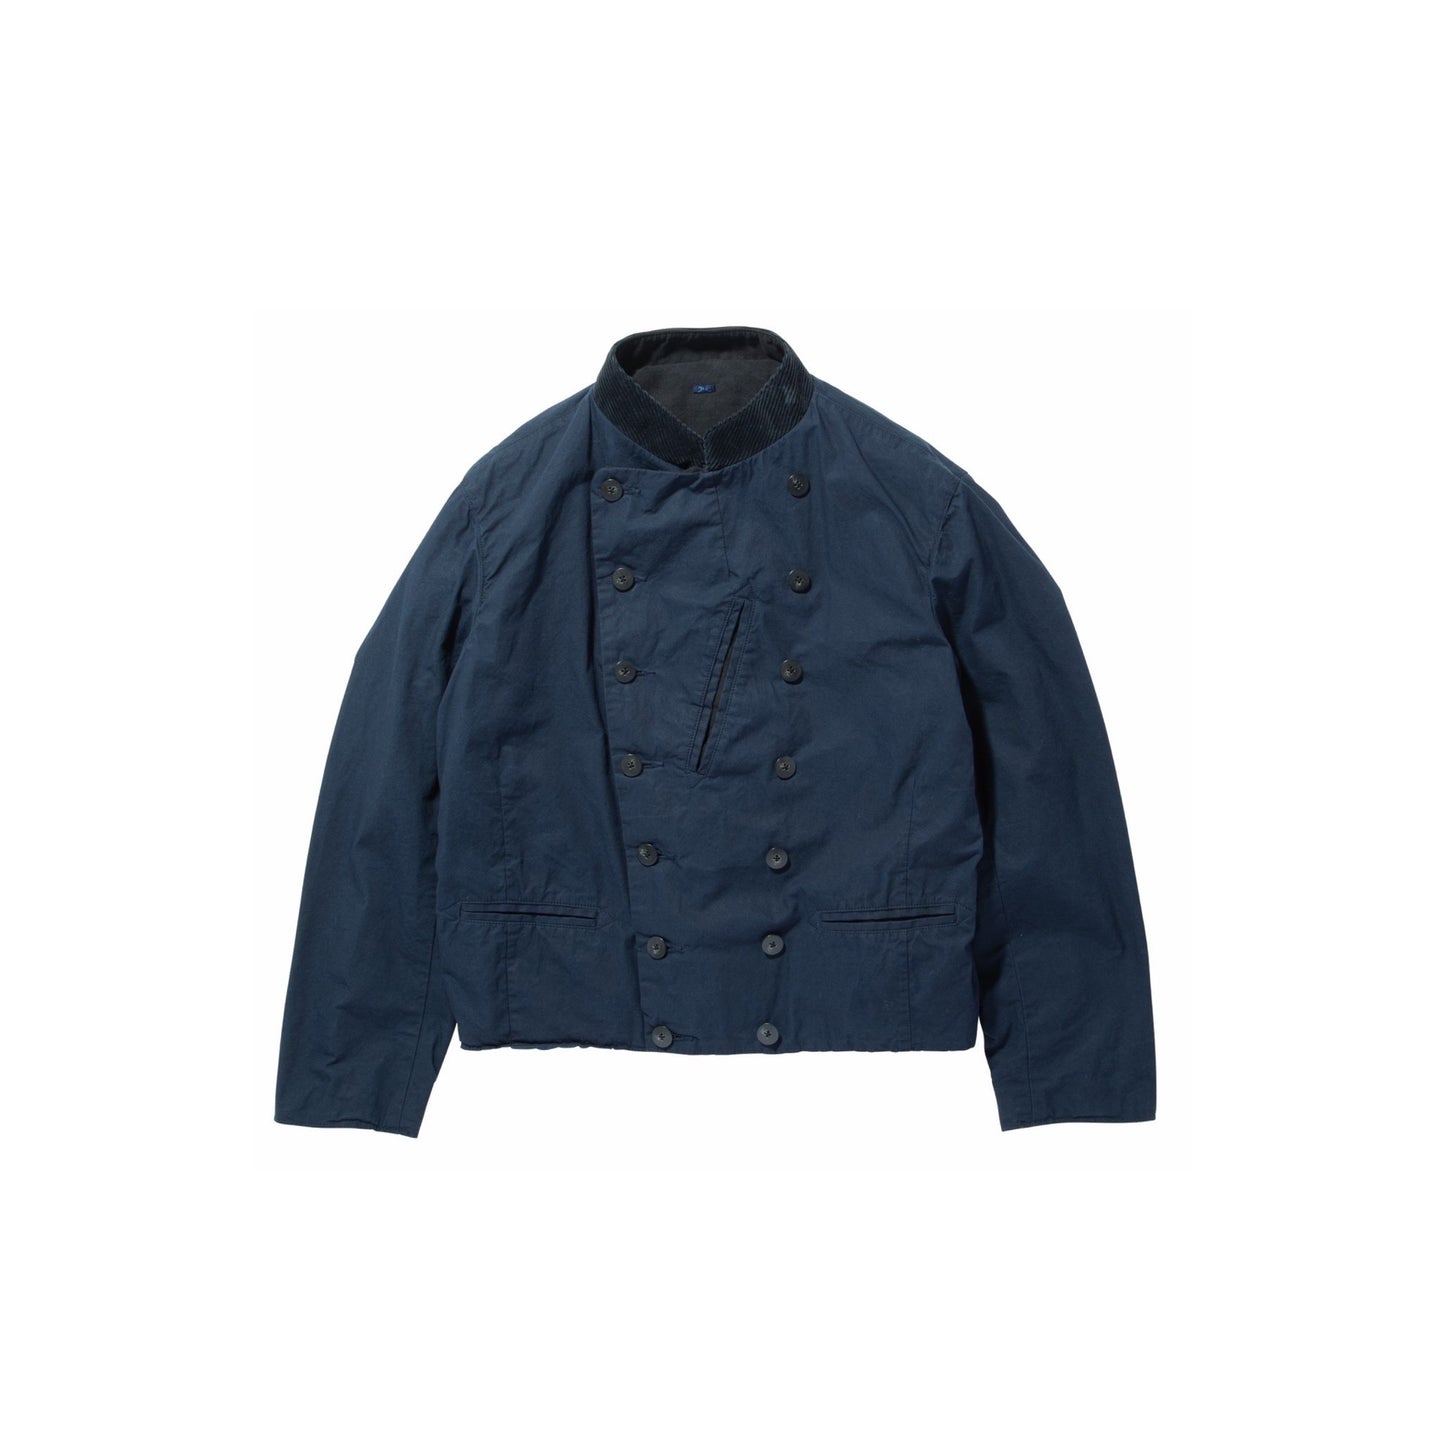 PARAFFIN CORDUROY DOUBLE RIDERS JACKET